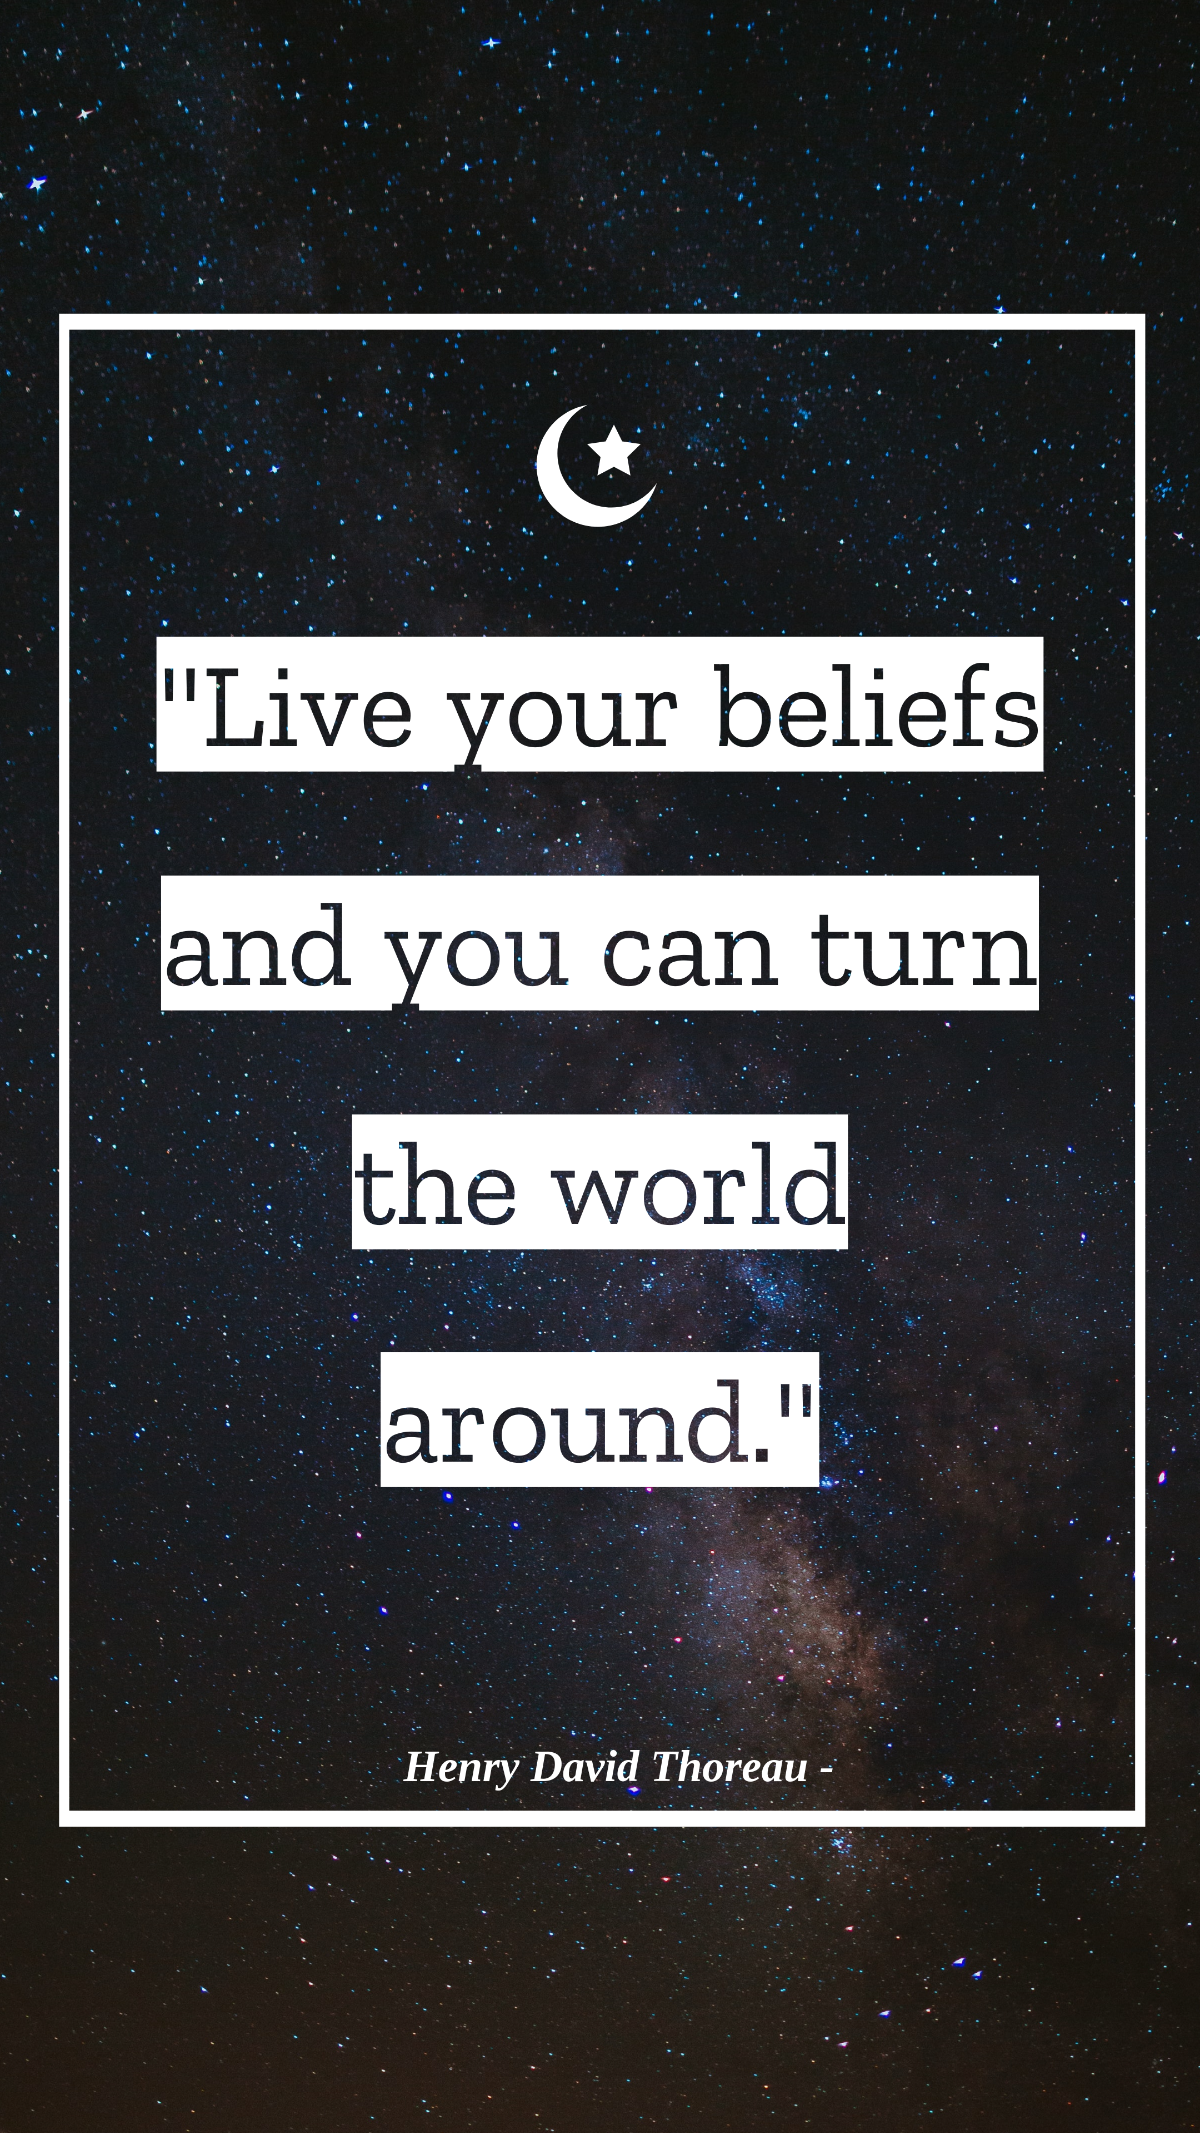 Henry David Thoreau - Live your beliefs and you can turn the world around.